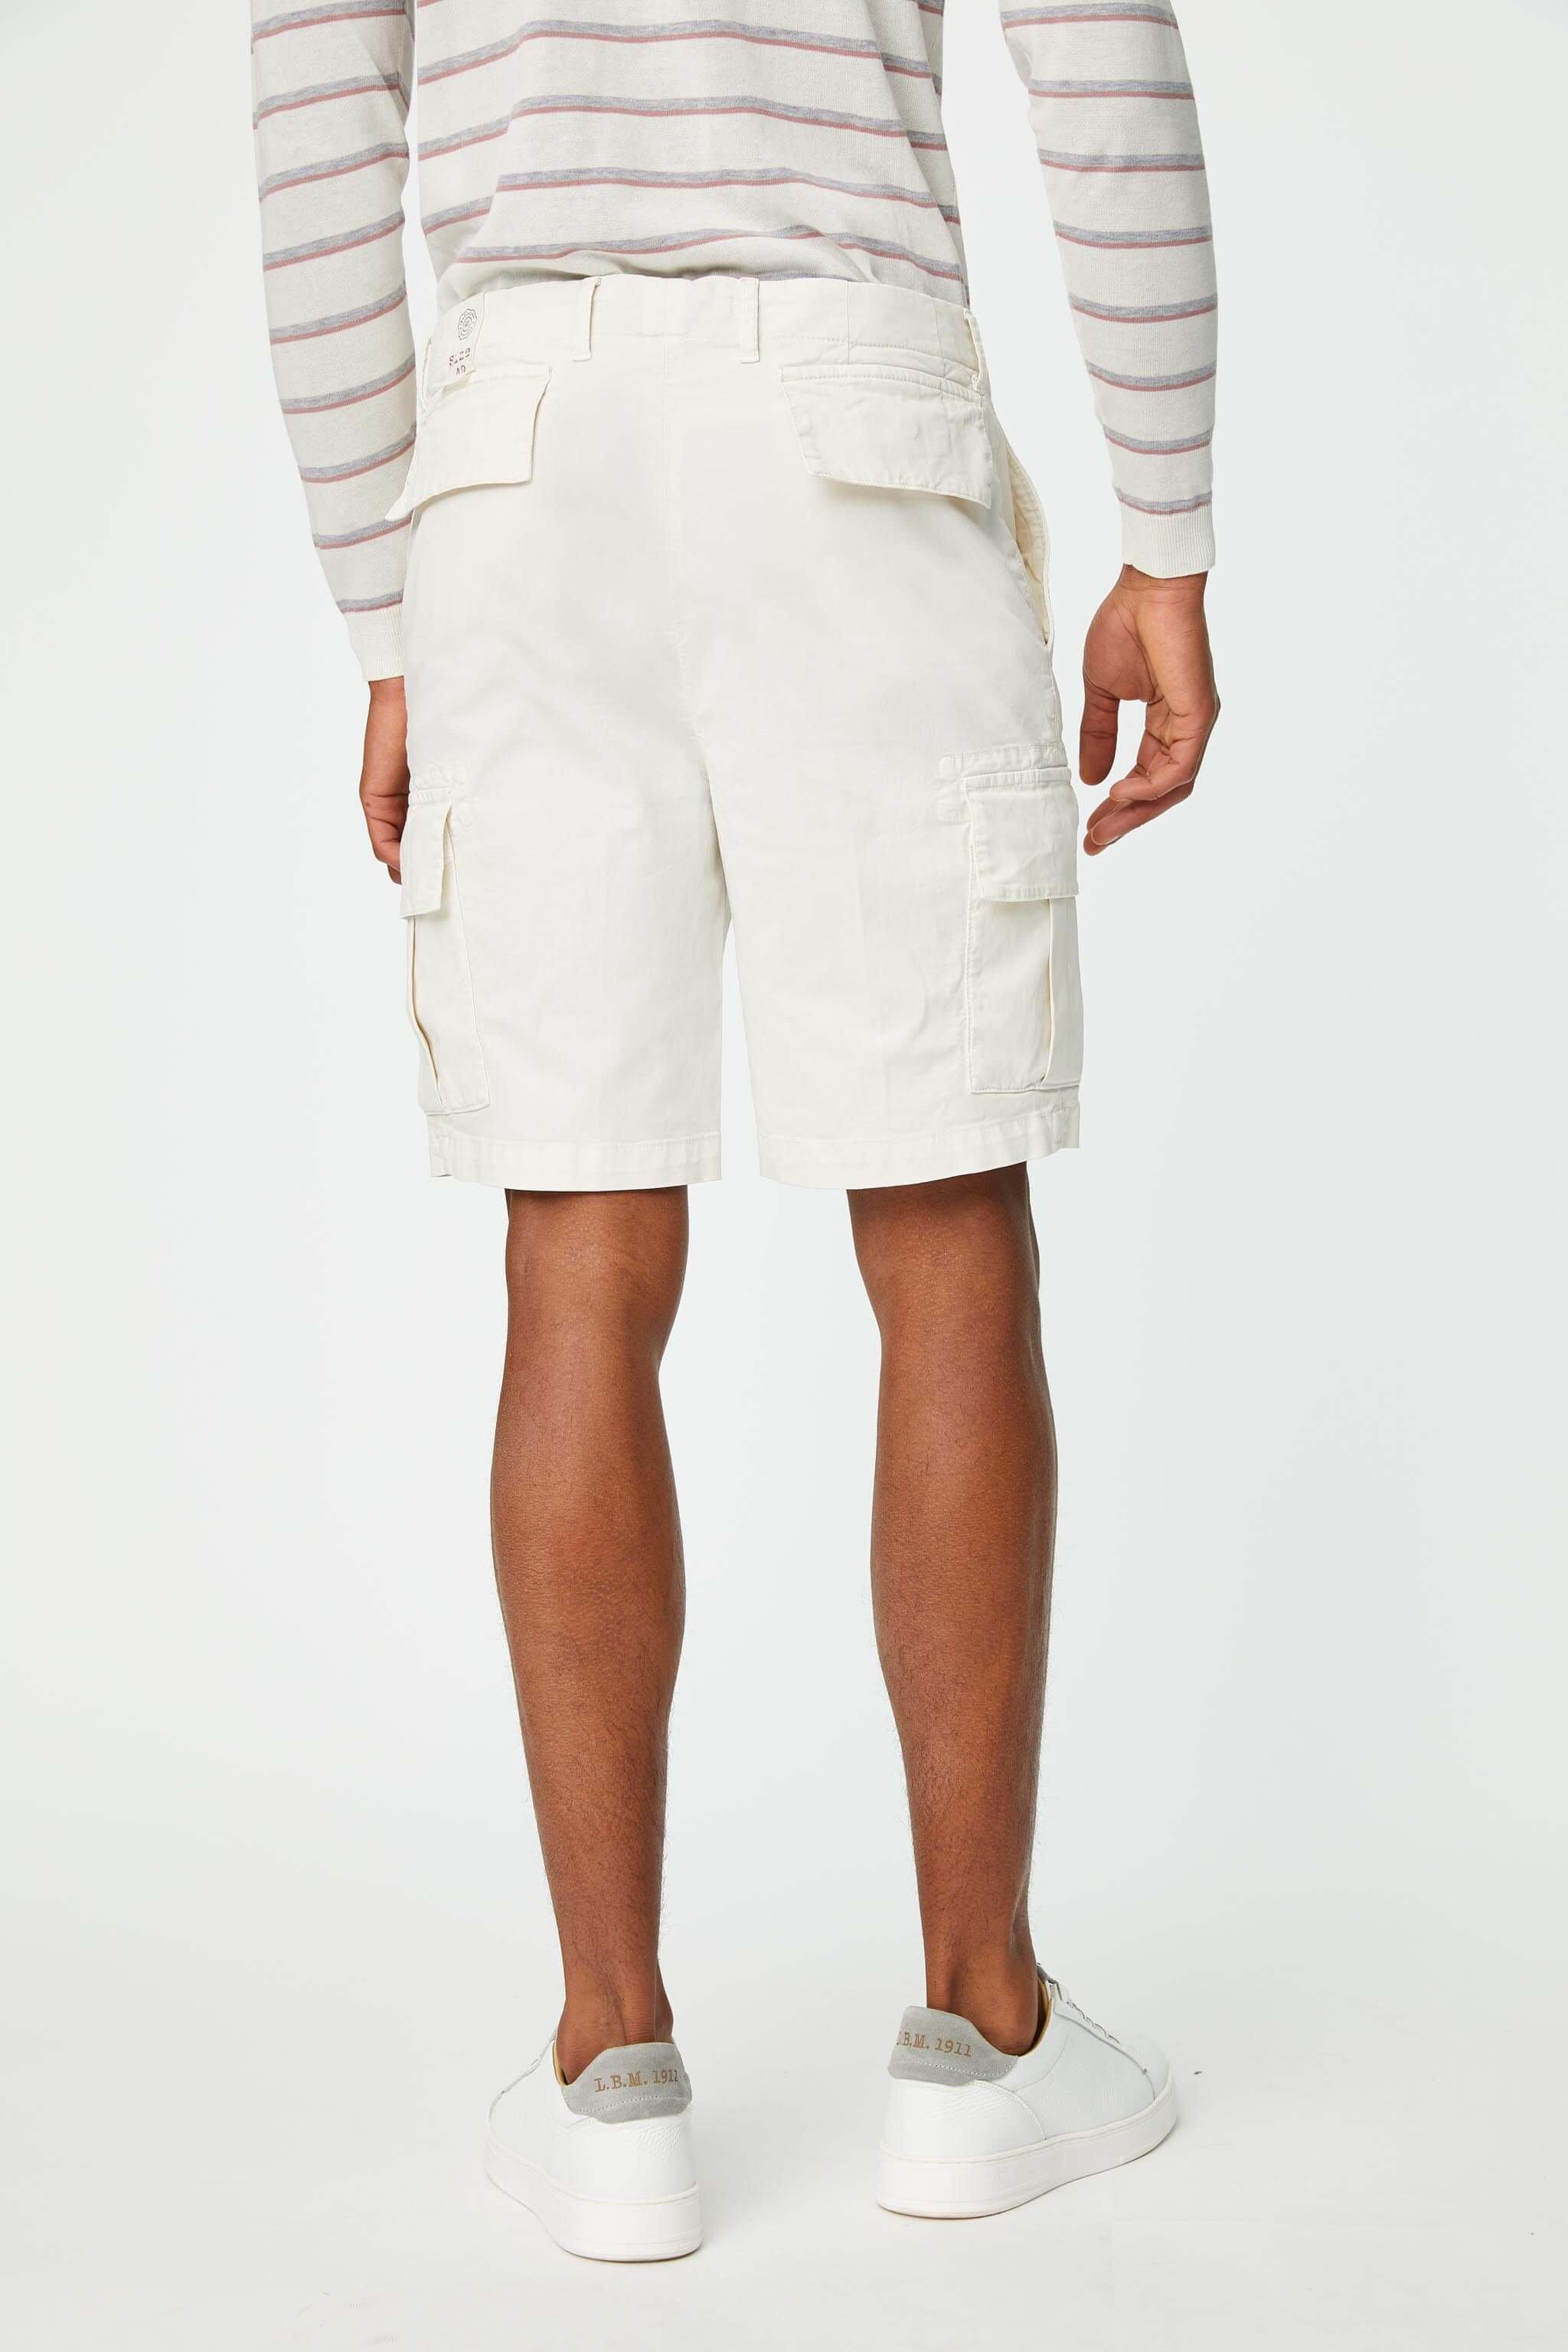 Garment-dyed CLARK shorts in ivory